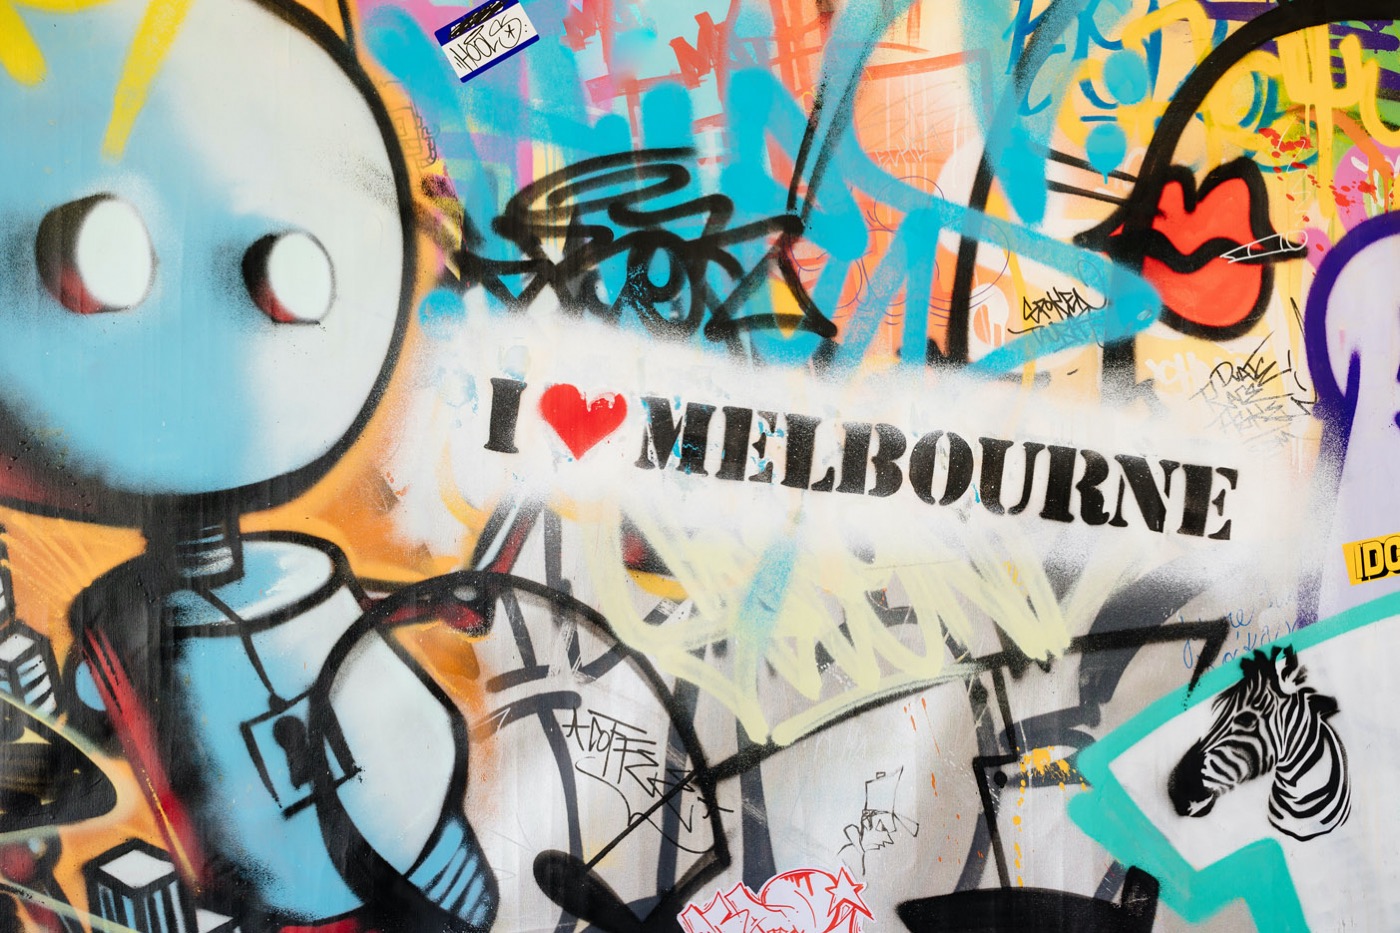 DoubleTree Room Takeover 'I love Melbourne'